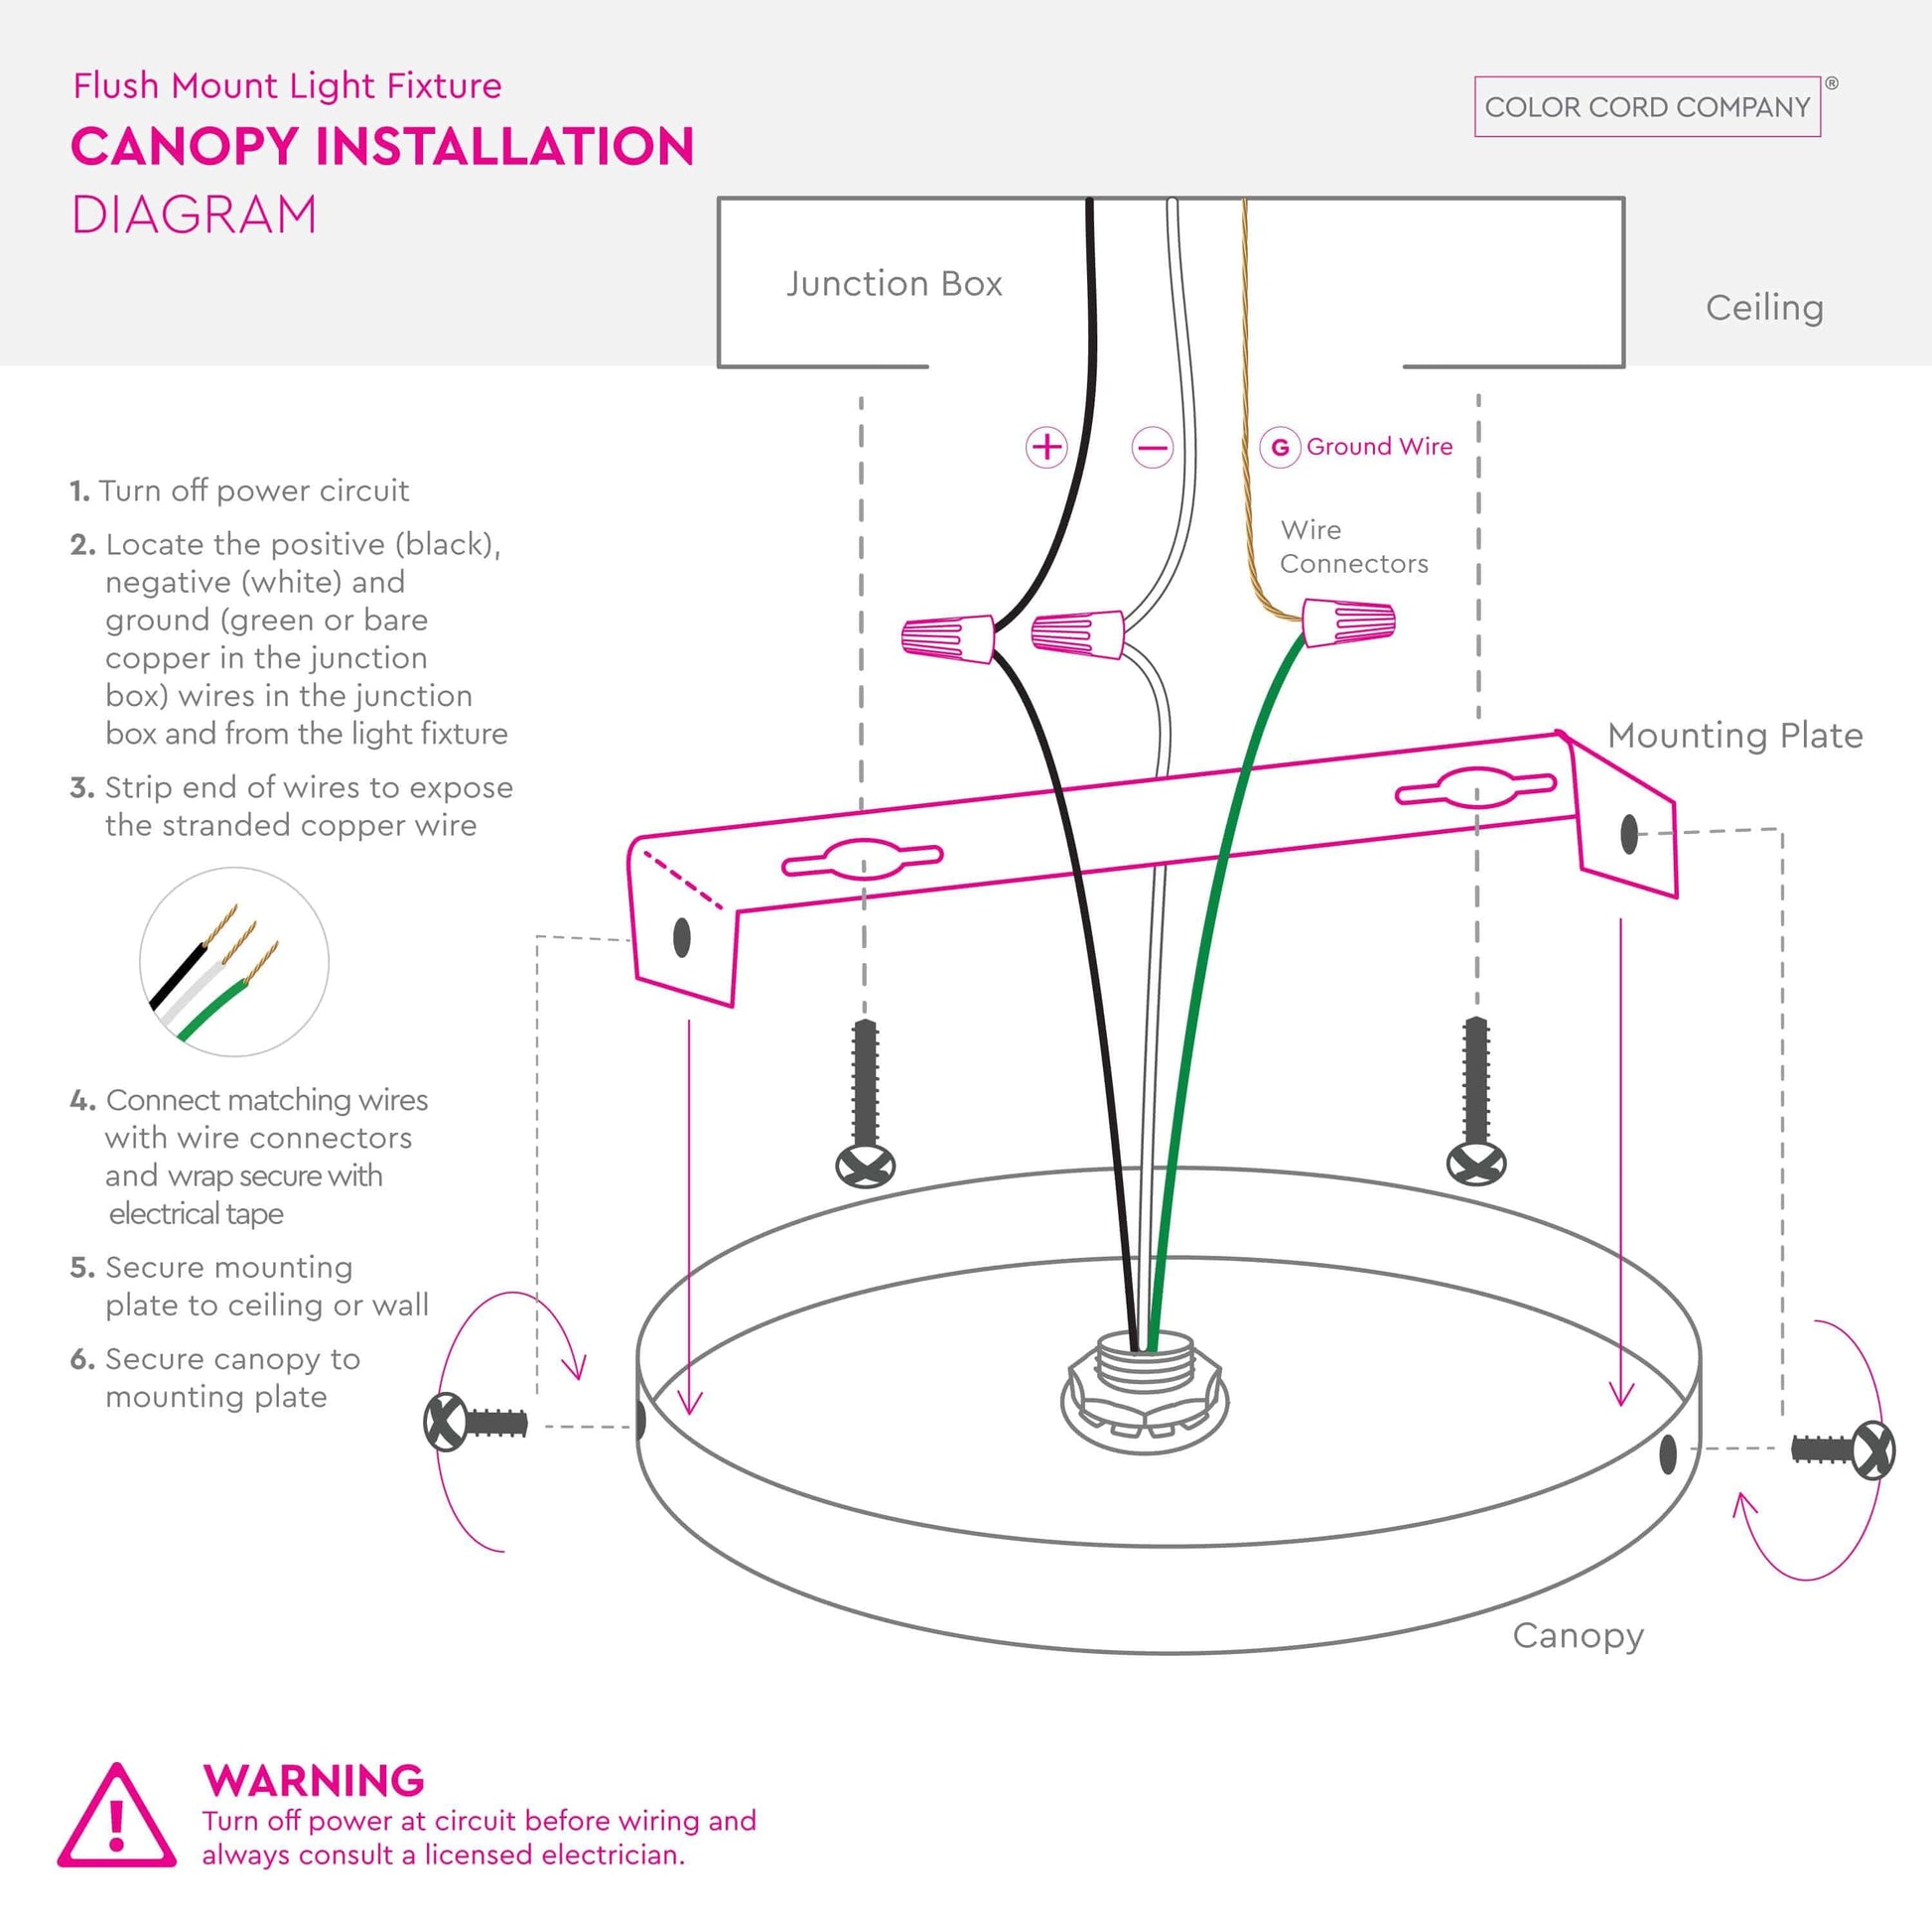 Installation instructions for ceiling canopy on Button Light